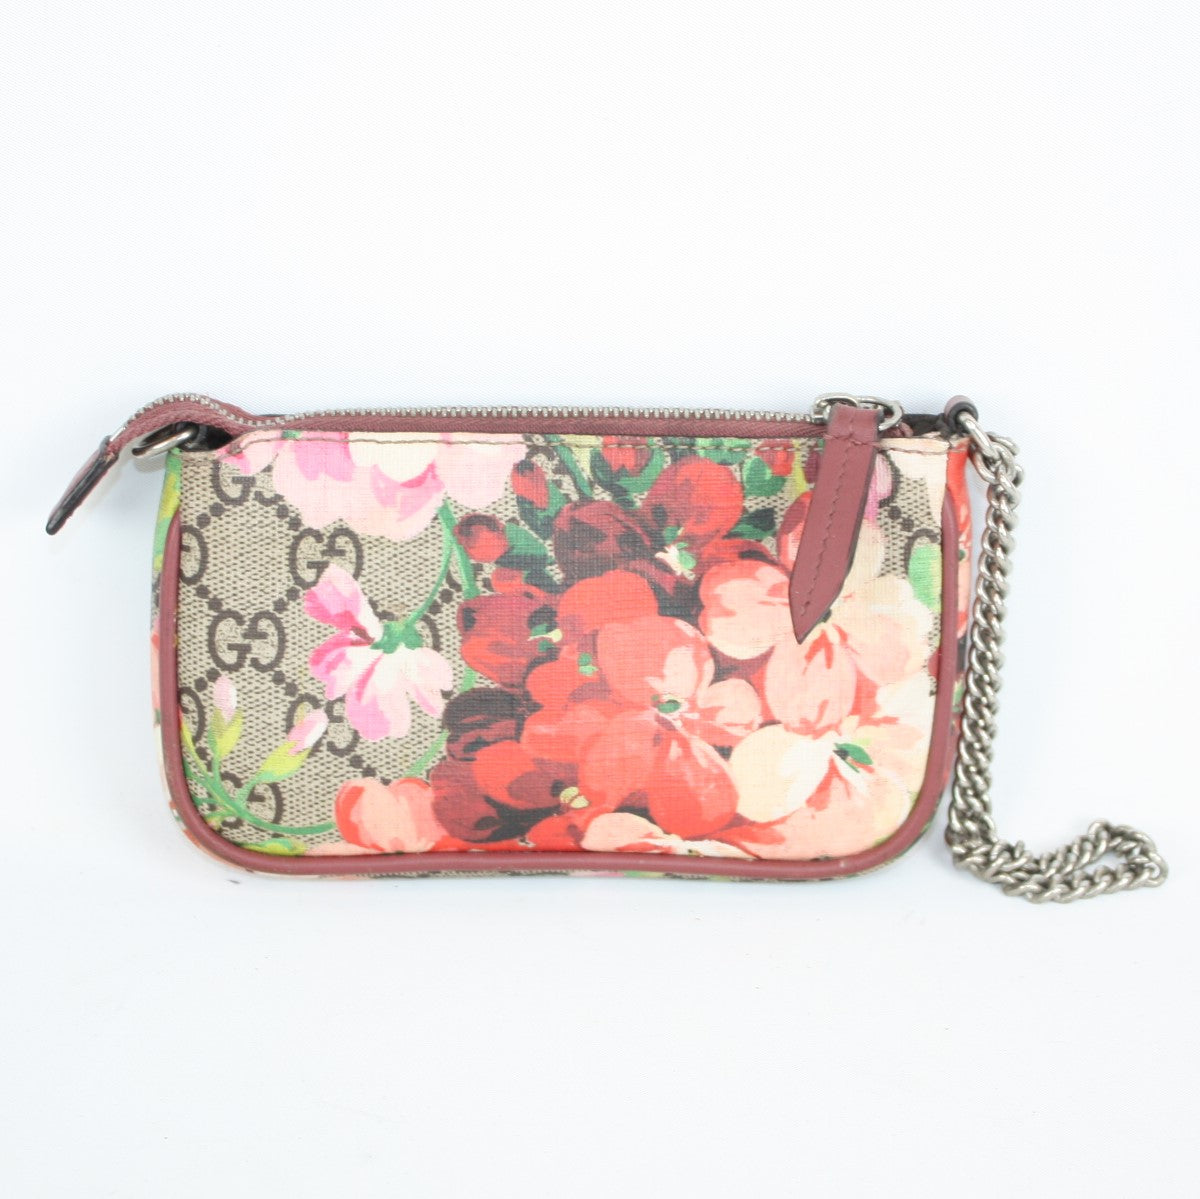 Gucci Gg Blooms Pouch (€260) ❤ liked on Polyvore featuring bags